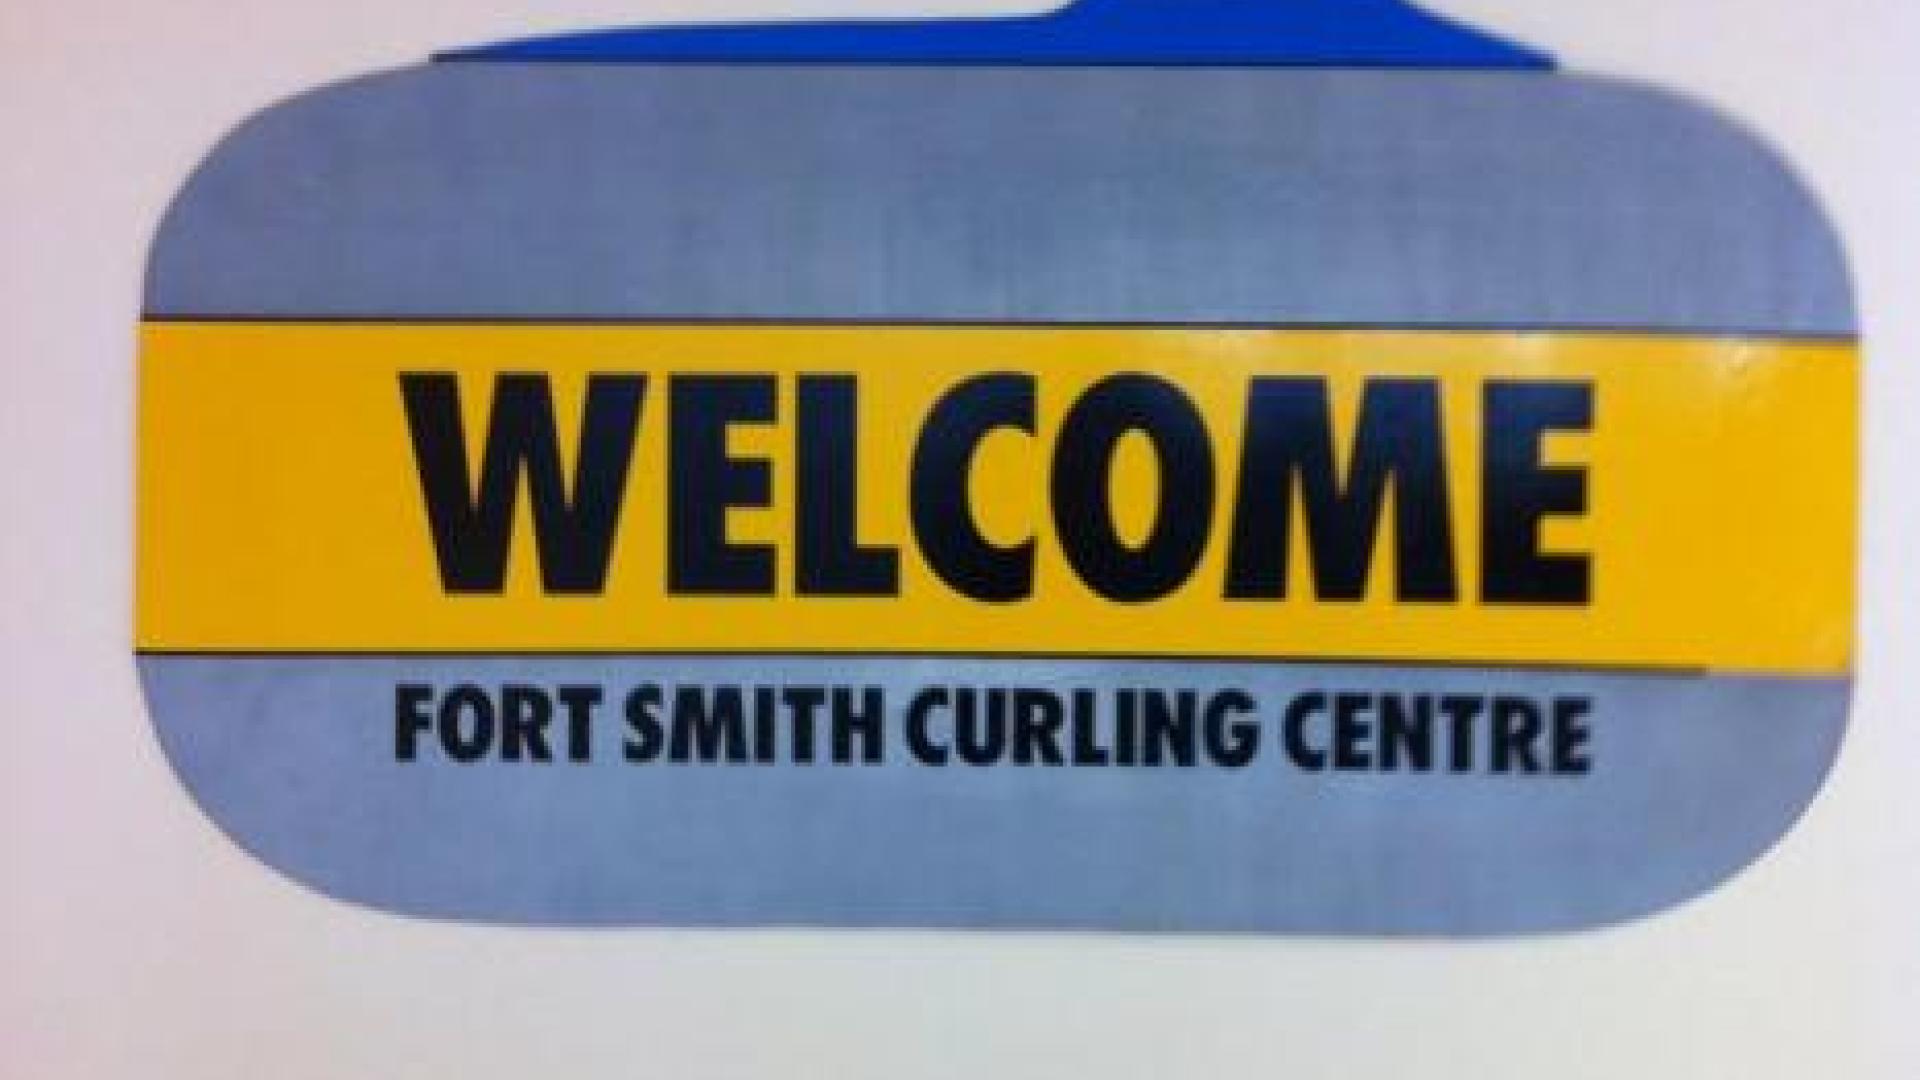 Fort Smith Curling and Winter Sport Centre welcome sign.